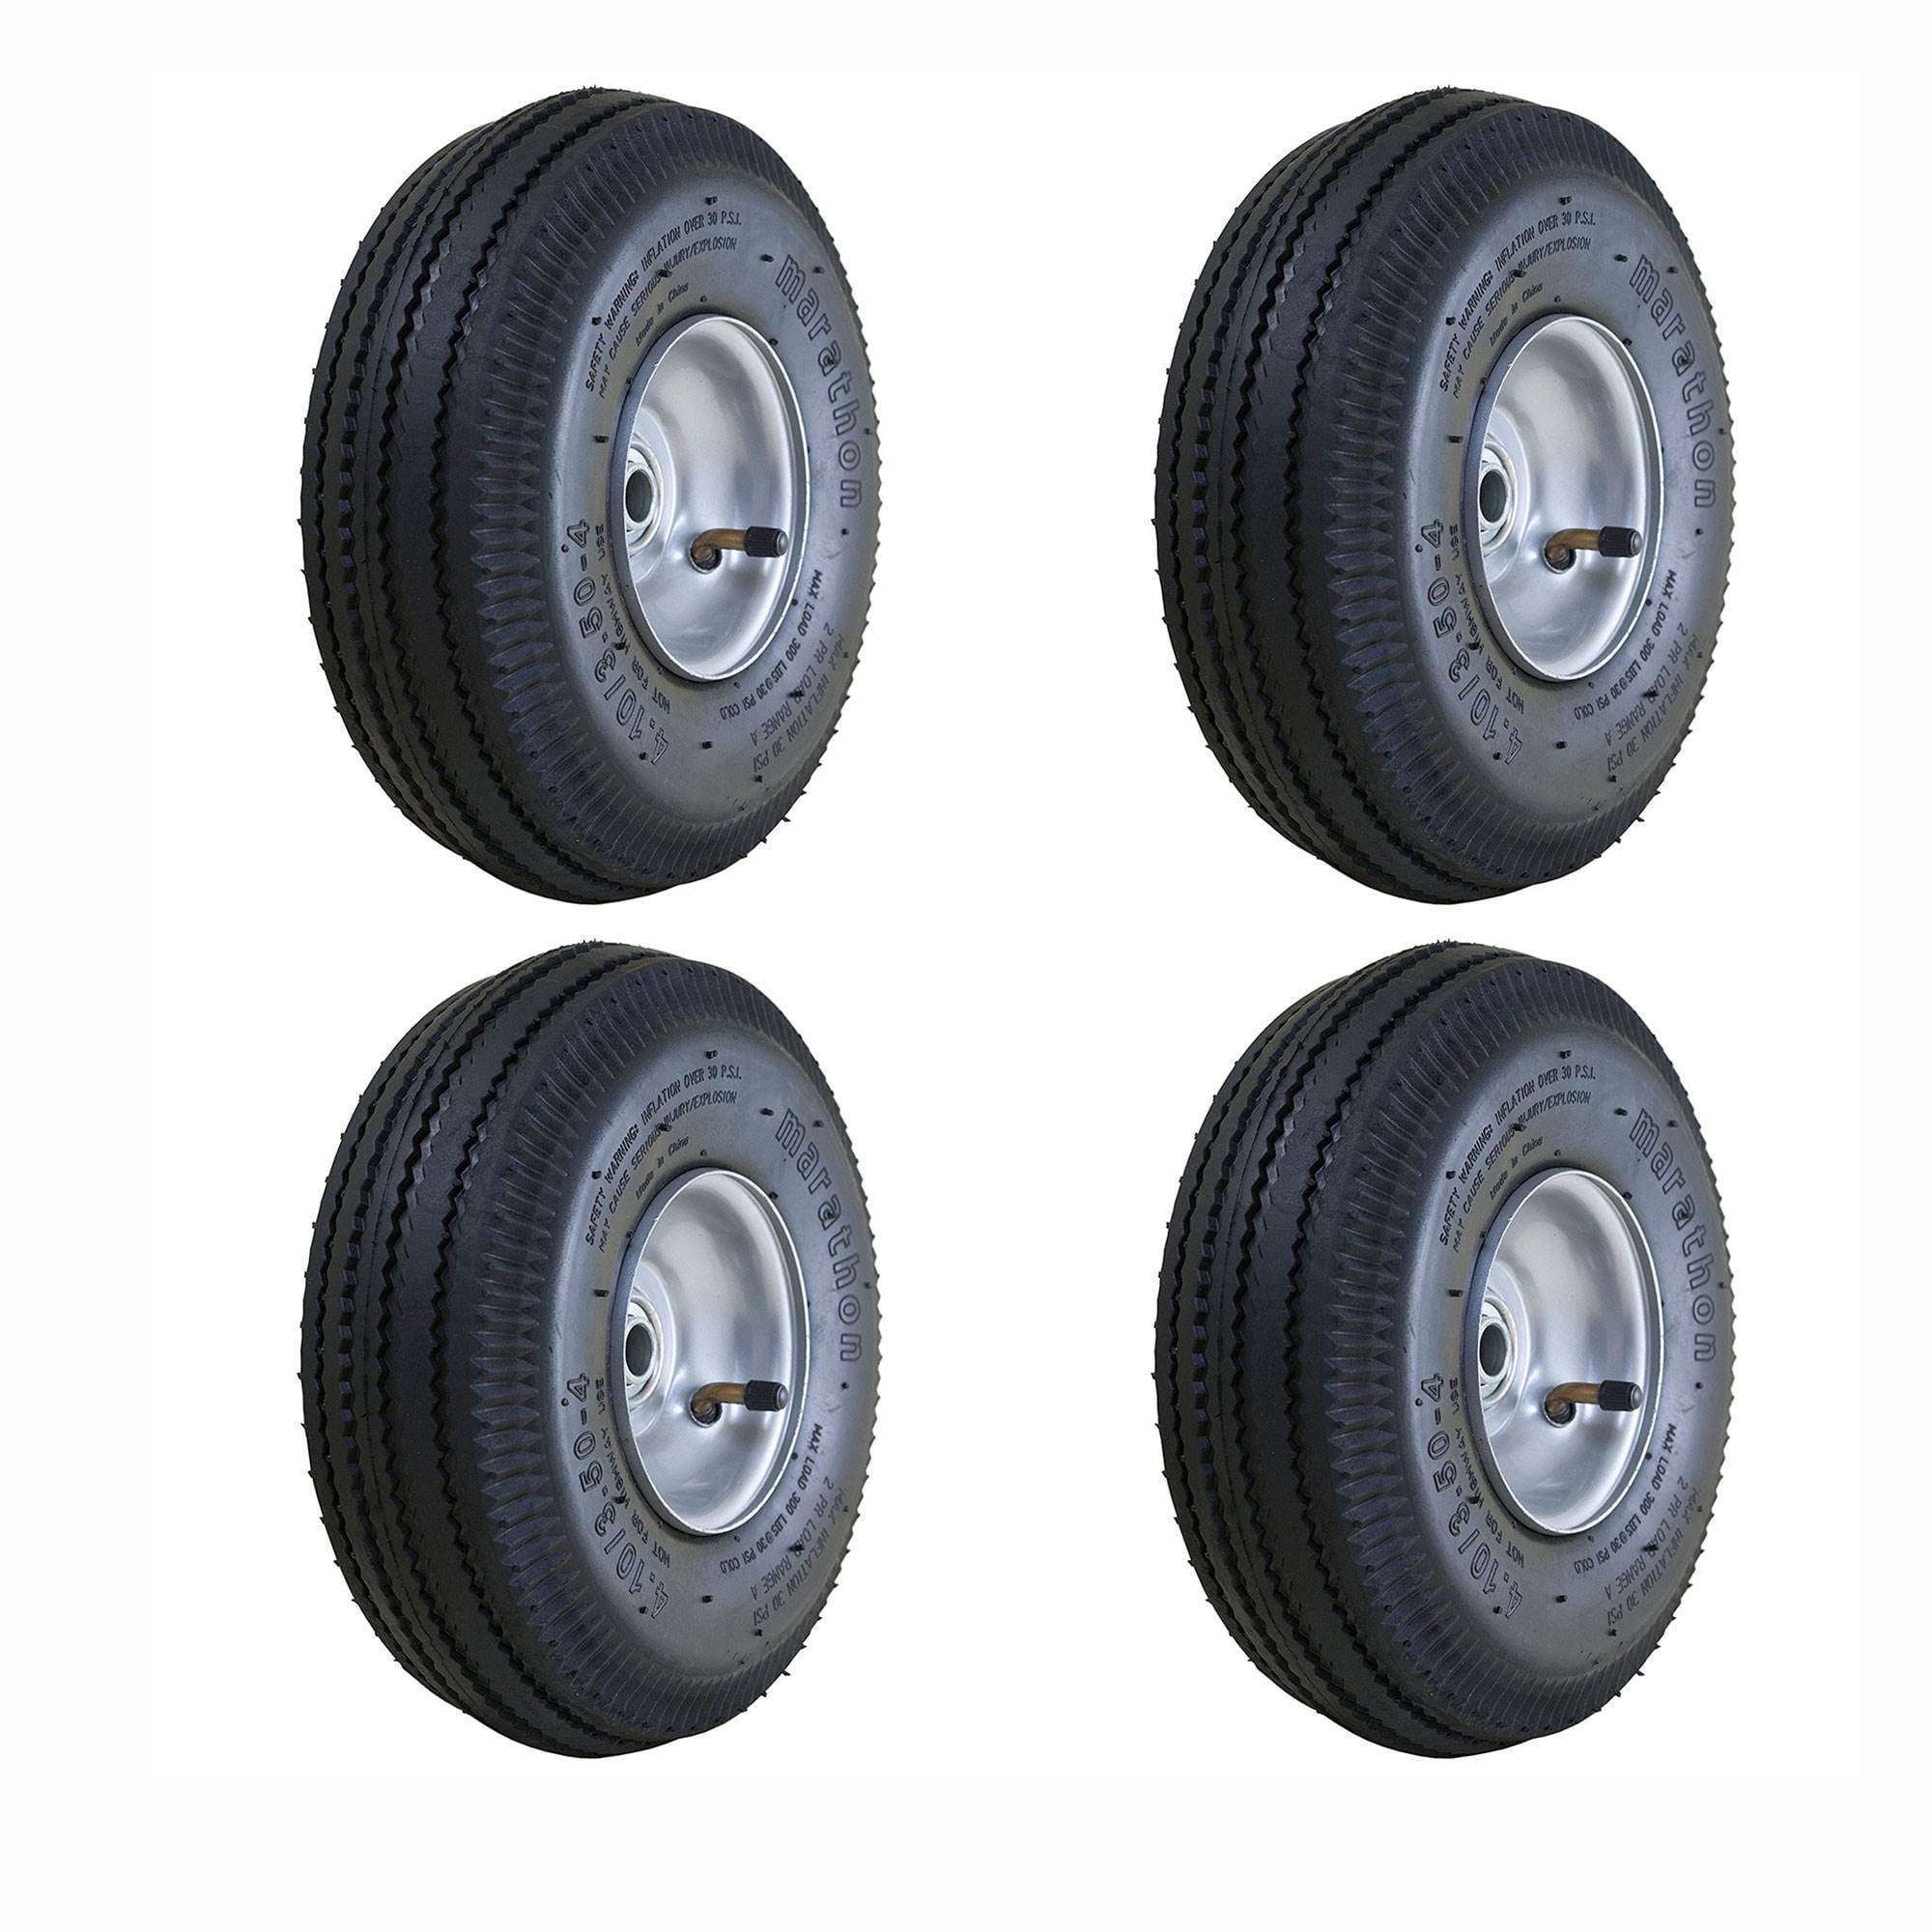 5/8 Bearings 2.25 Offset Hub Pack of 3 Air Filled Marathon 4.10/3.50-4 Pneumatic Hand Truck/All Purpose Utility Tire on Wheel 